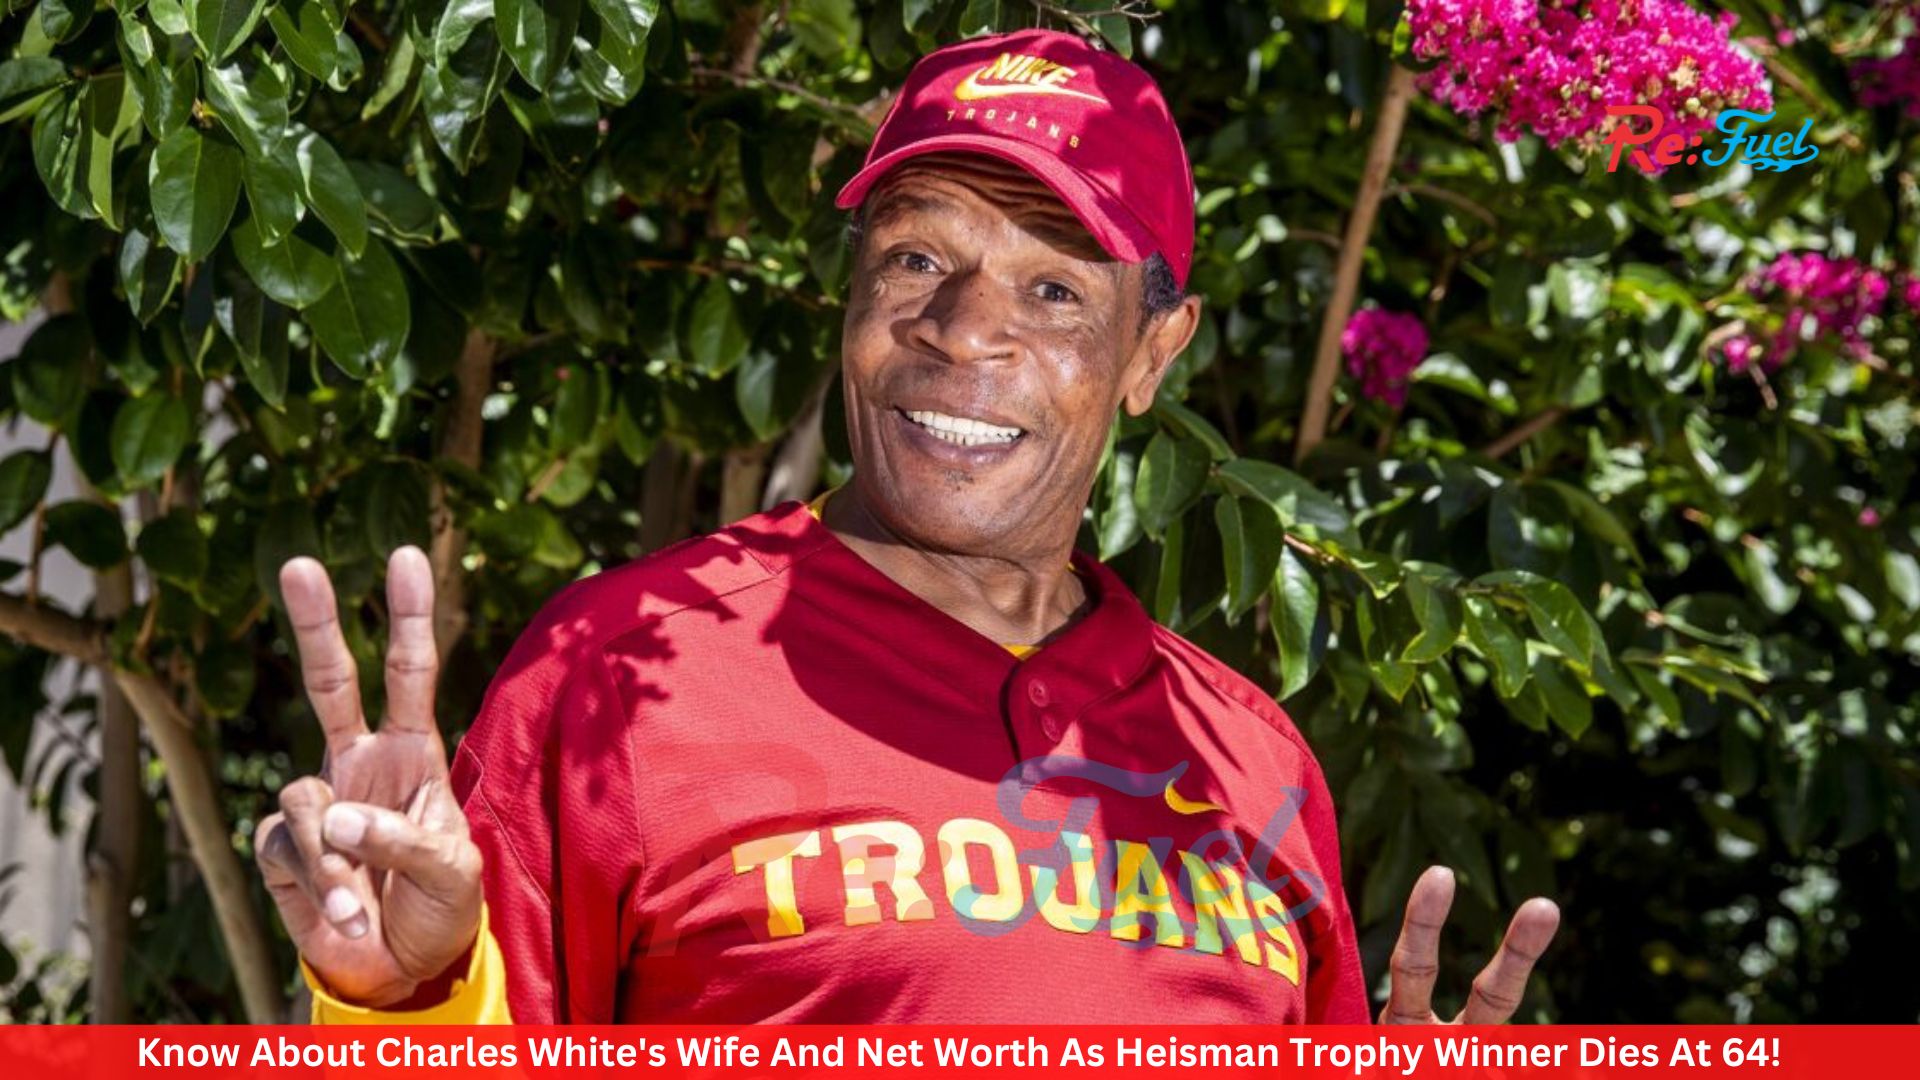 Know About Charles White's Wife And Net Worth As Heisman Trophy Winner Dies At 64!